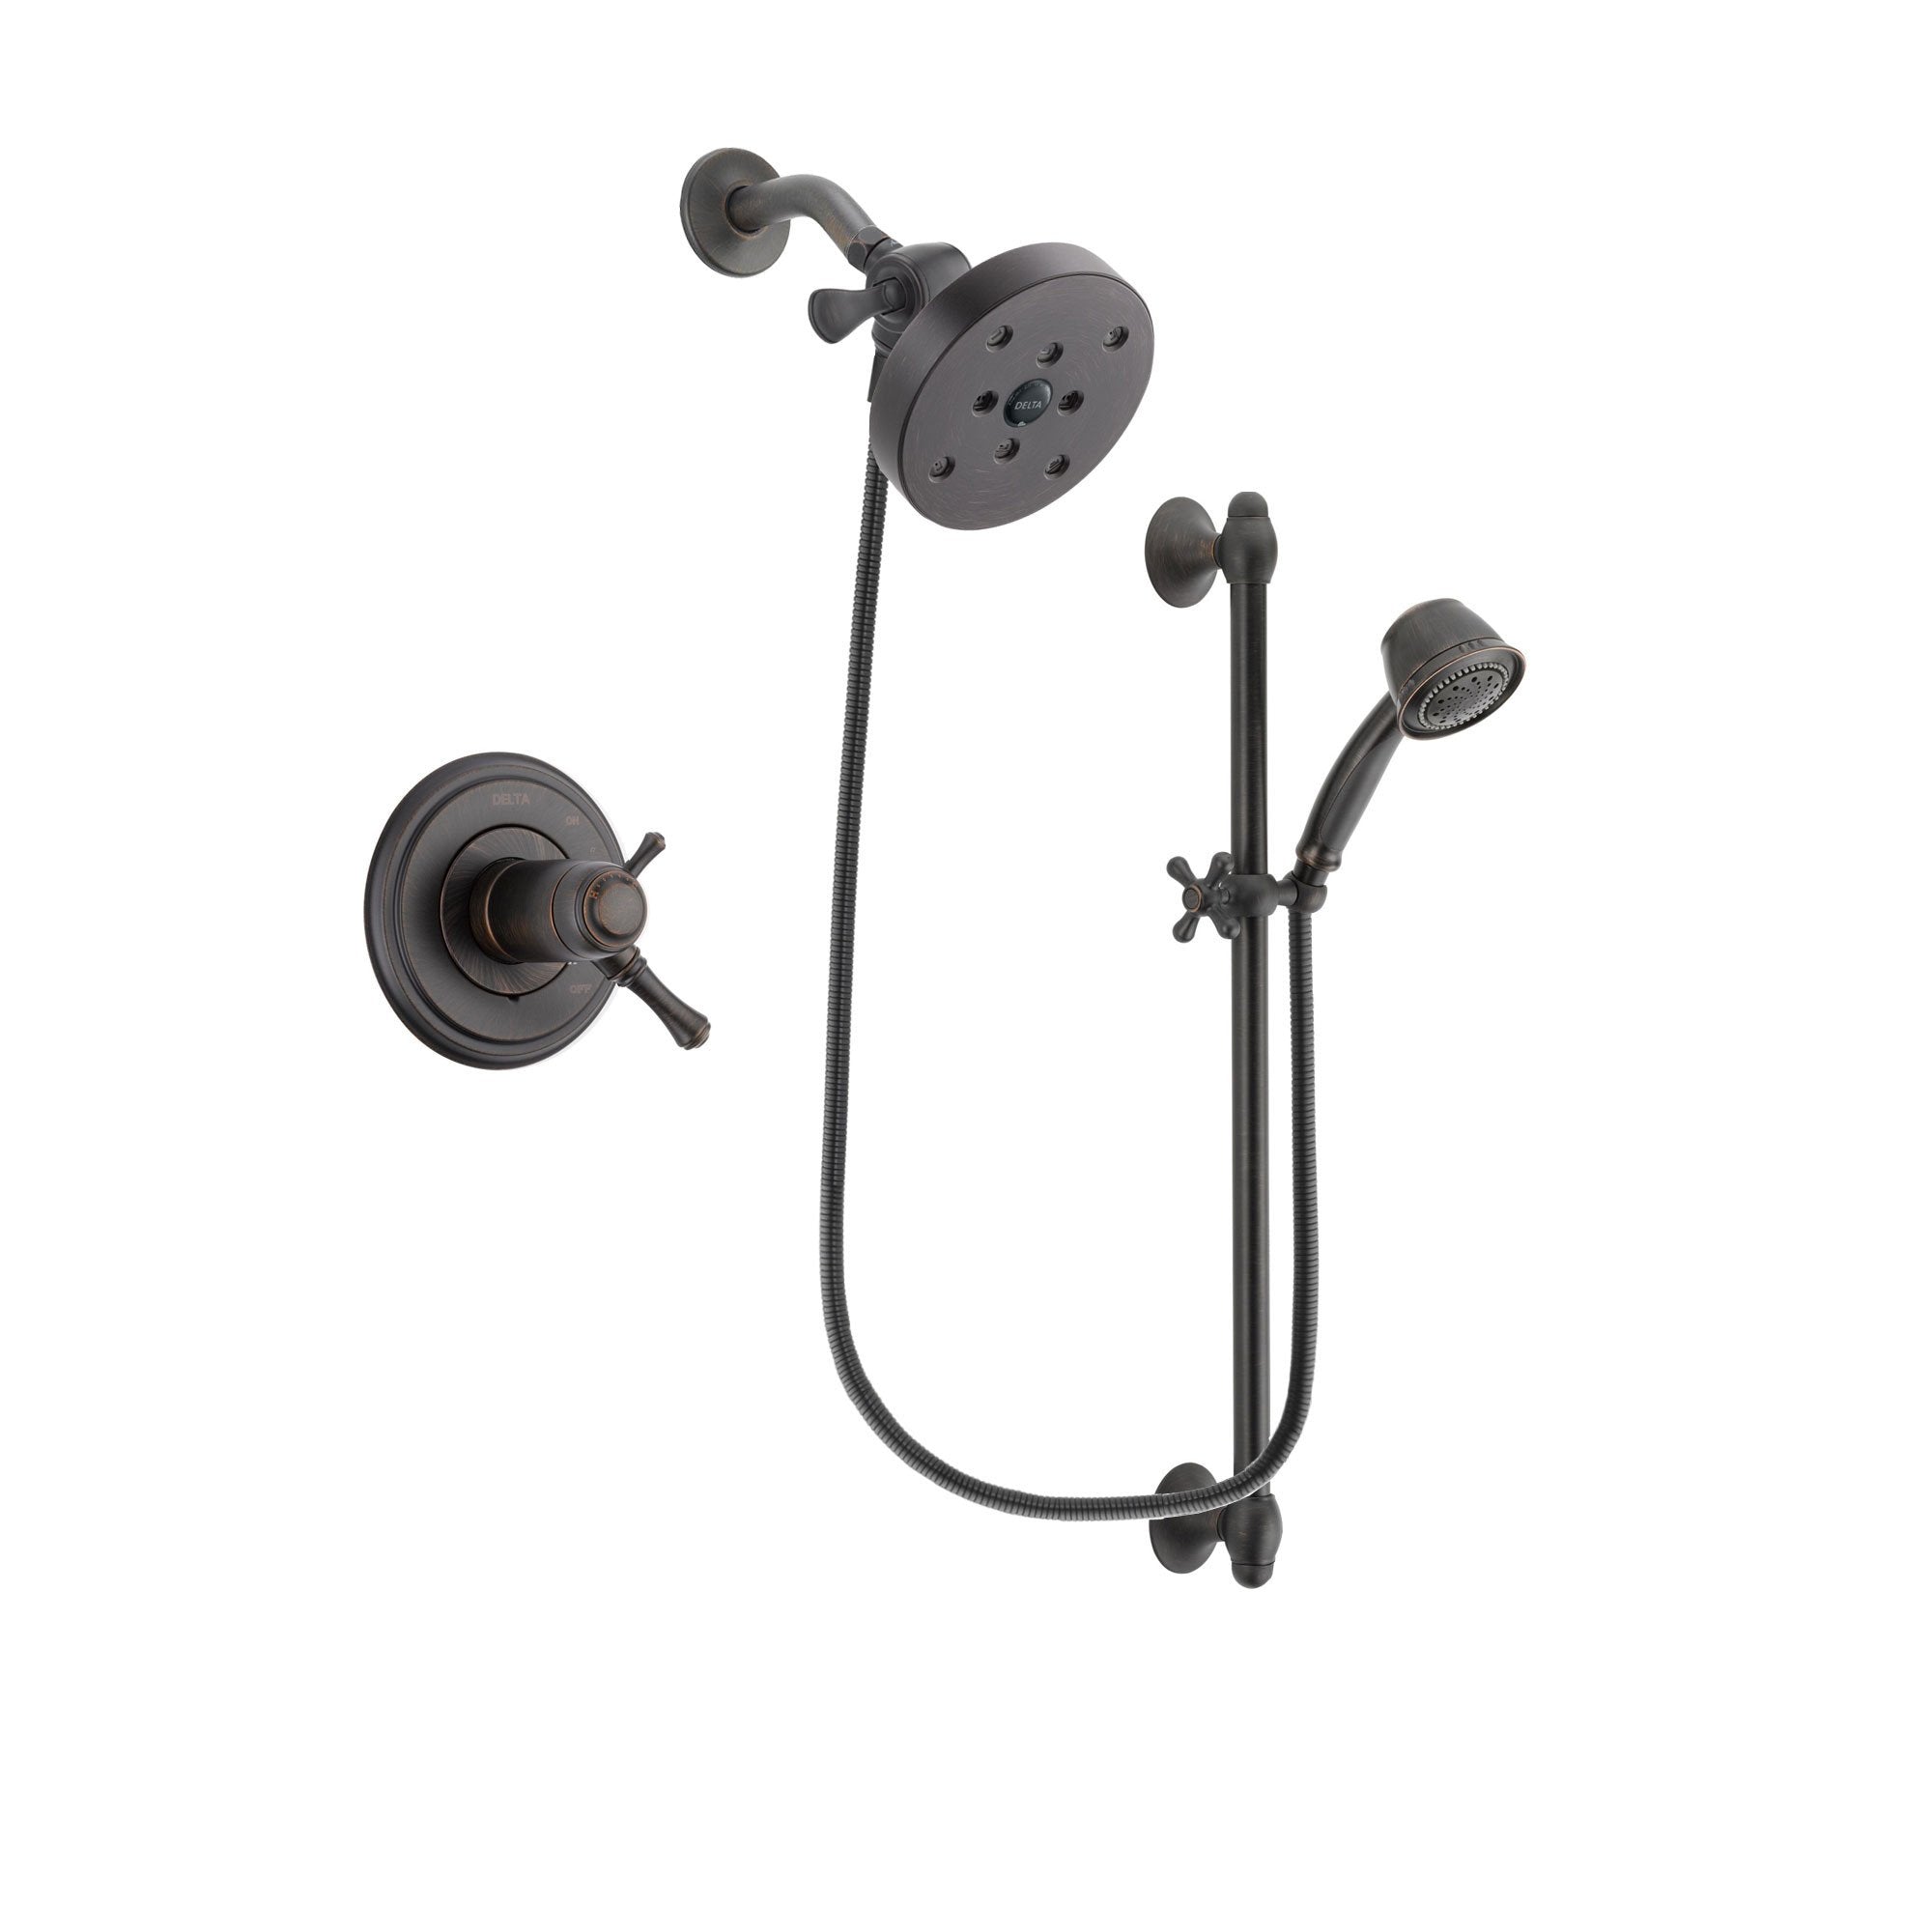 Delta Cassidy Venetian Bronze Finish Thermostatic Shower Faucet System Package with 5-1/2 inch Showerhead and 5-Spray Personal Handshower with Slide Bar Includes Rough-in Valve DSP2600V